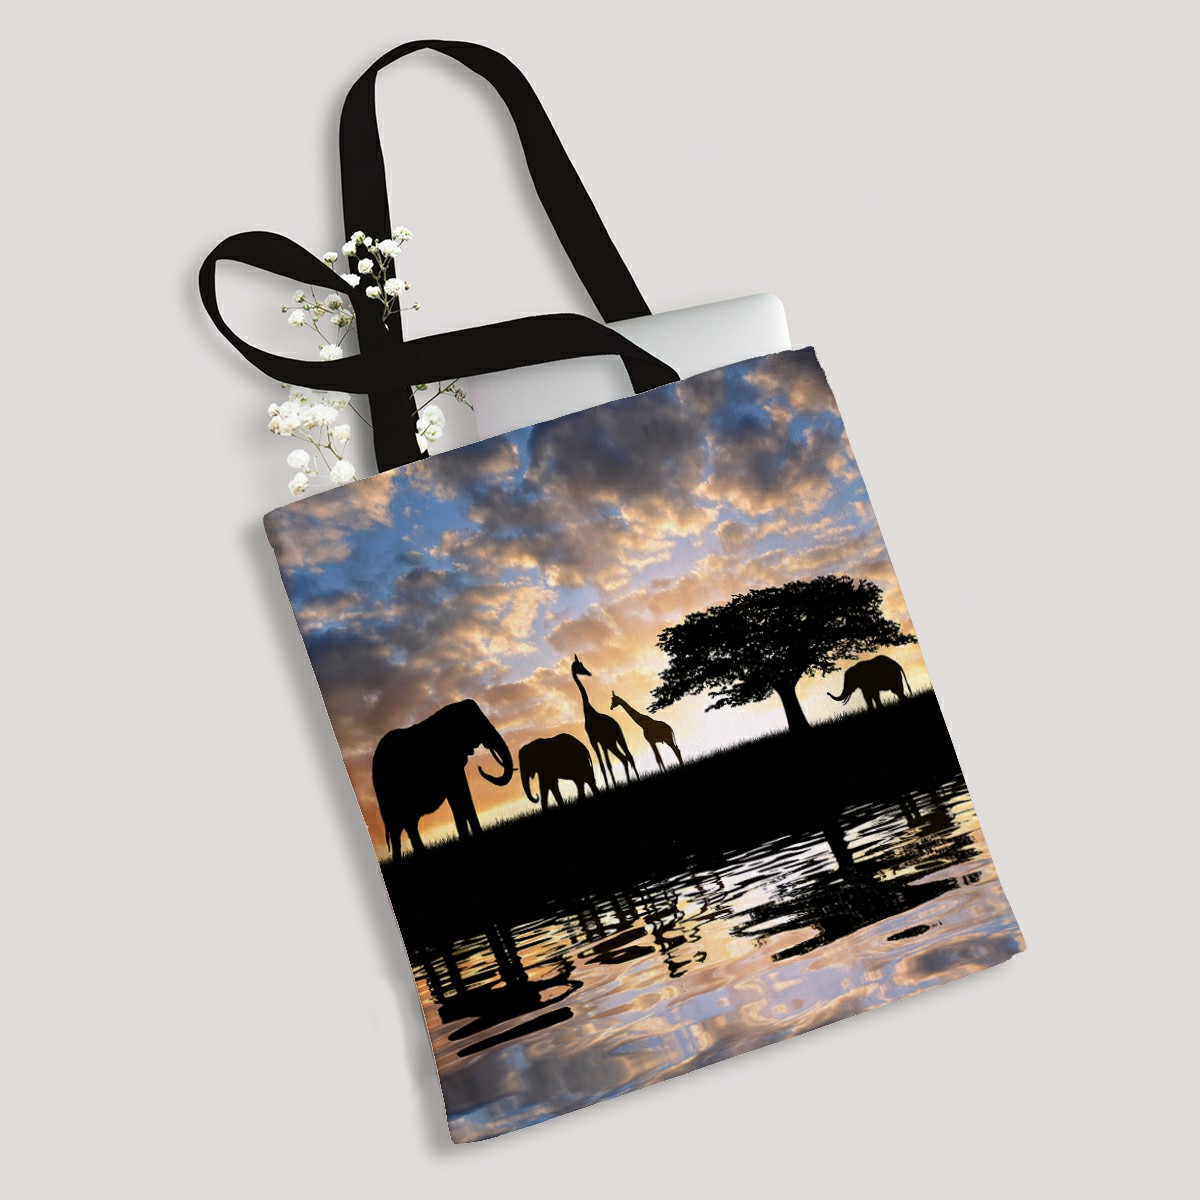 ECZJNT Silhouette elephants giraffes sunset Canvas Bag Reusable Tote Grocery Shopping Bags Tote Bag 14"(W) x 16"(H) - image 1 of 1